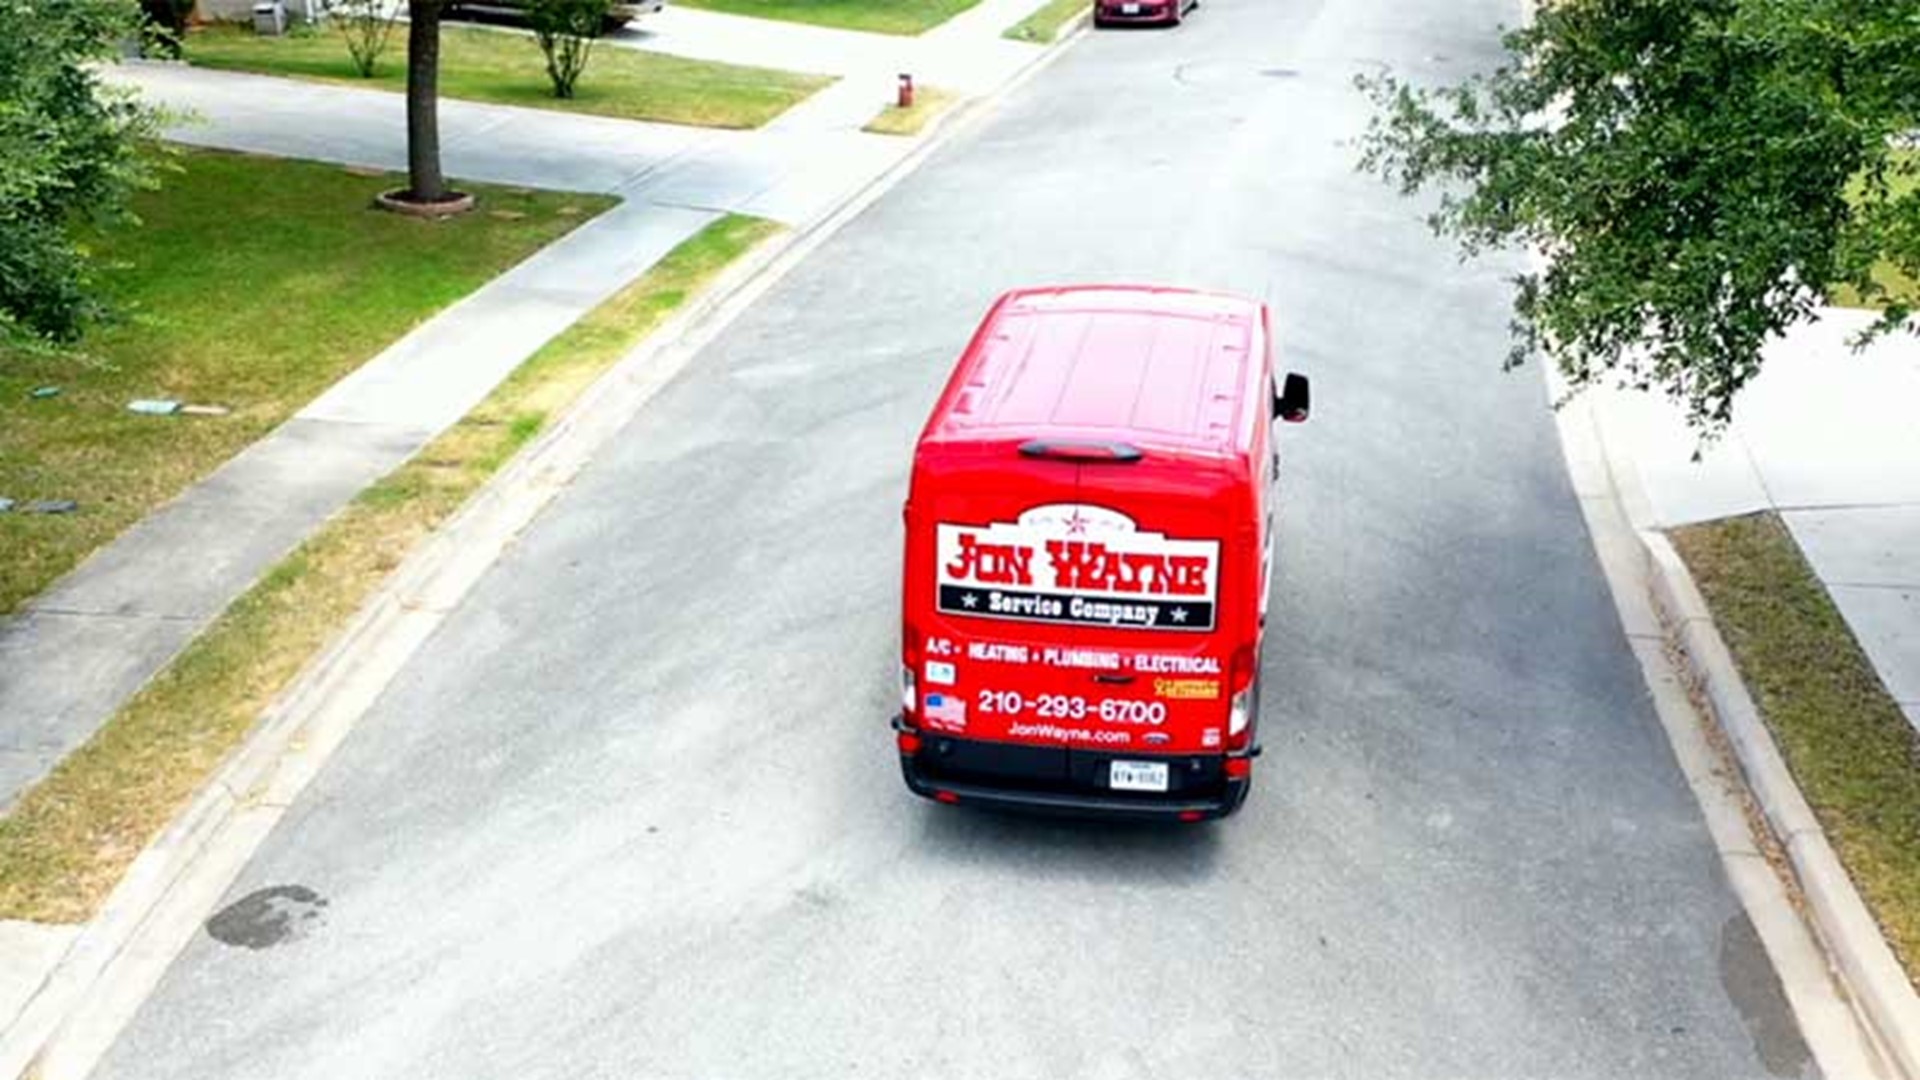 Jon Wayne Service Company is still here to serve your needs 24/7. They're doing everything possible to protect customers and employees.